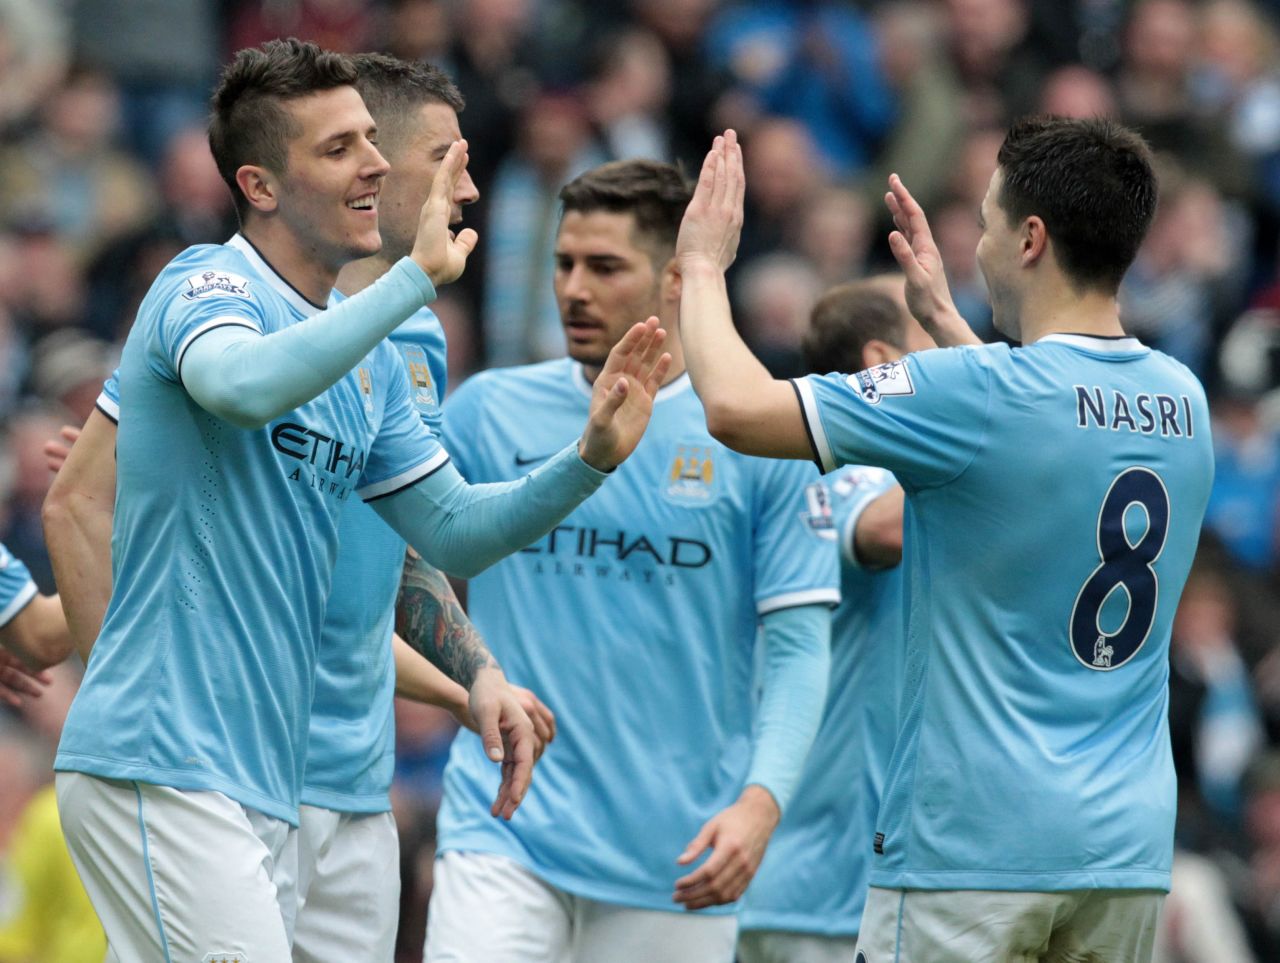 Manchester City is the best paid team in global sport, according to<a href="http://www.sportingintelligence.com/2014/04/15/revealed-man-city-yankees-dodgers-rm-barca-best-paid-in-global-sport-150401/" target="_blank" target="_blank"> Sporting Intelligence's Global Sports Salaries Survey for 2014.</a>